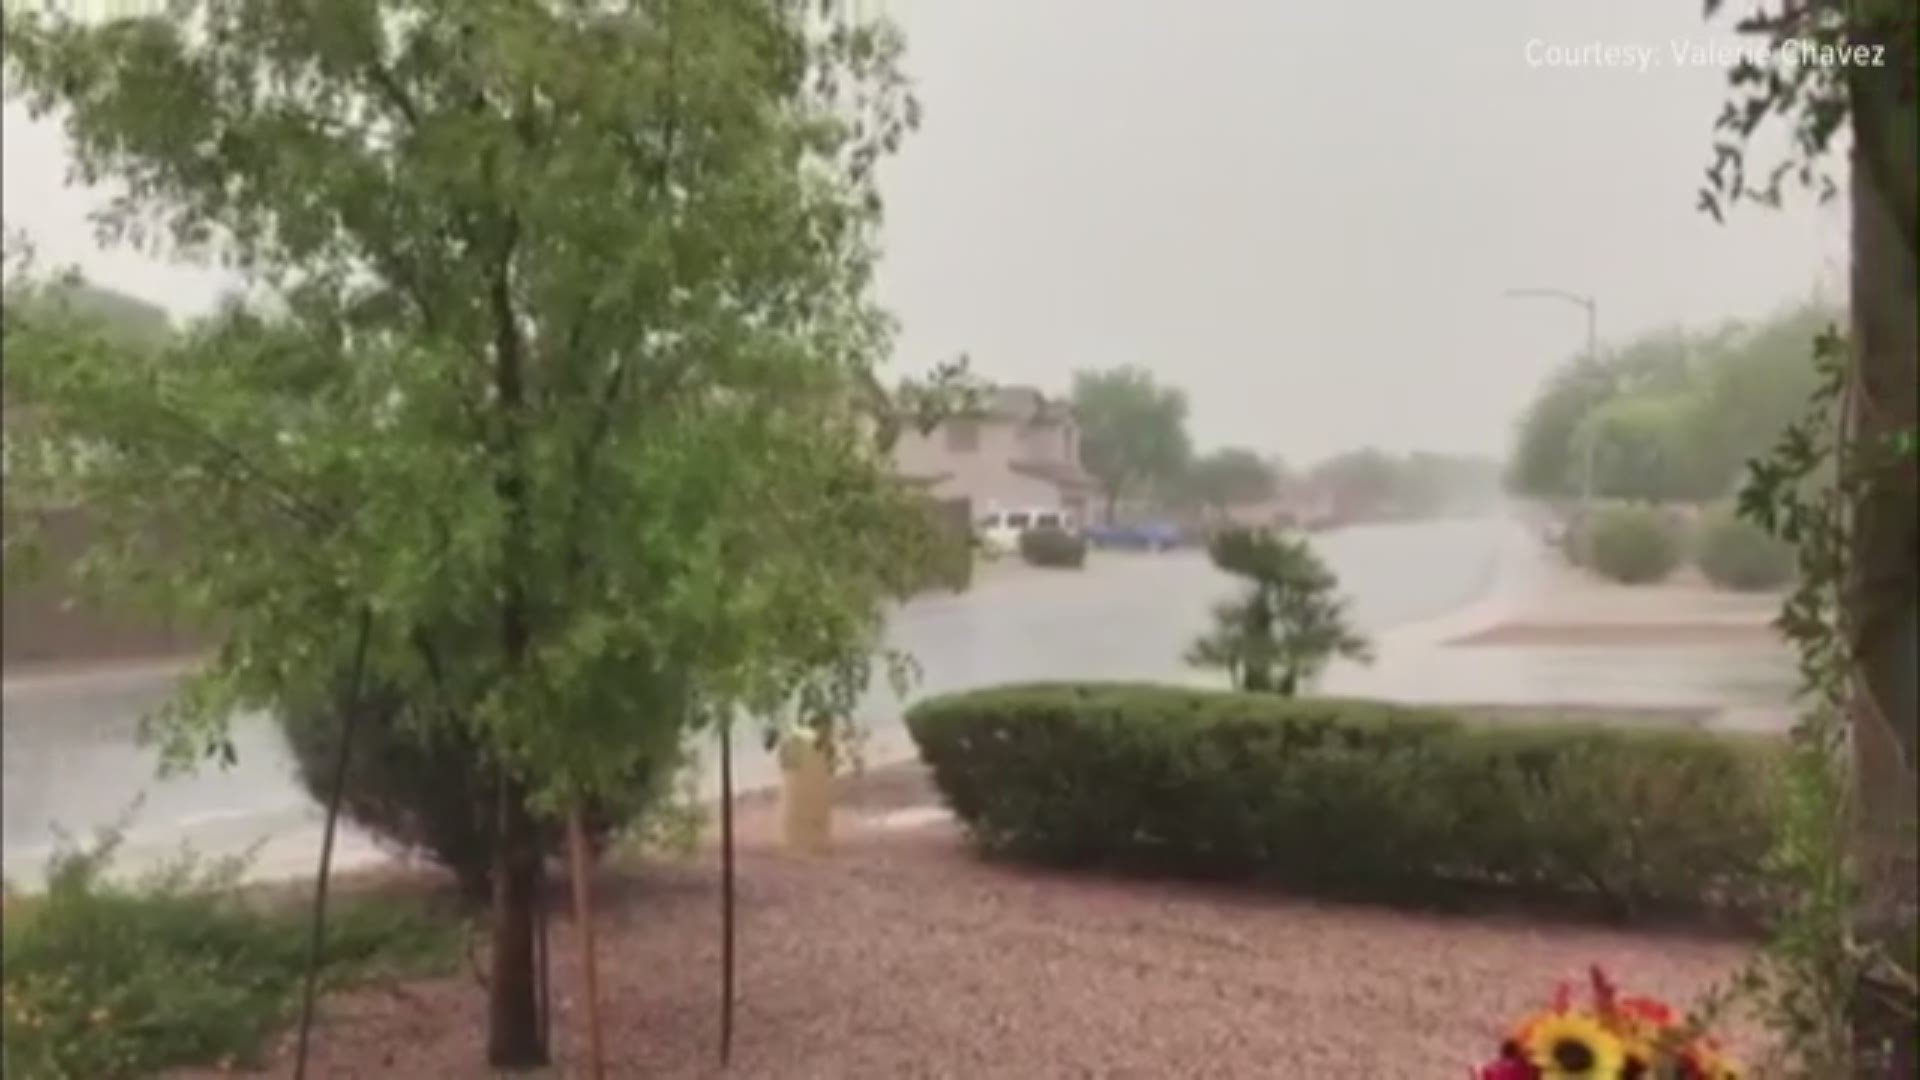 The rain is coming down in Casa Grande this afternoon. Video: Valerie Chavez